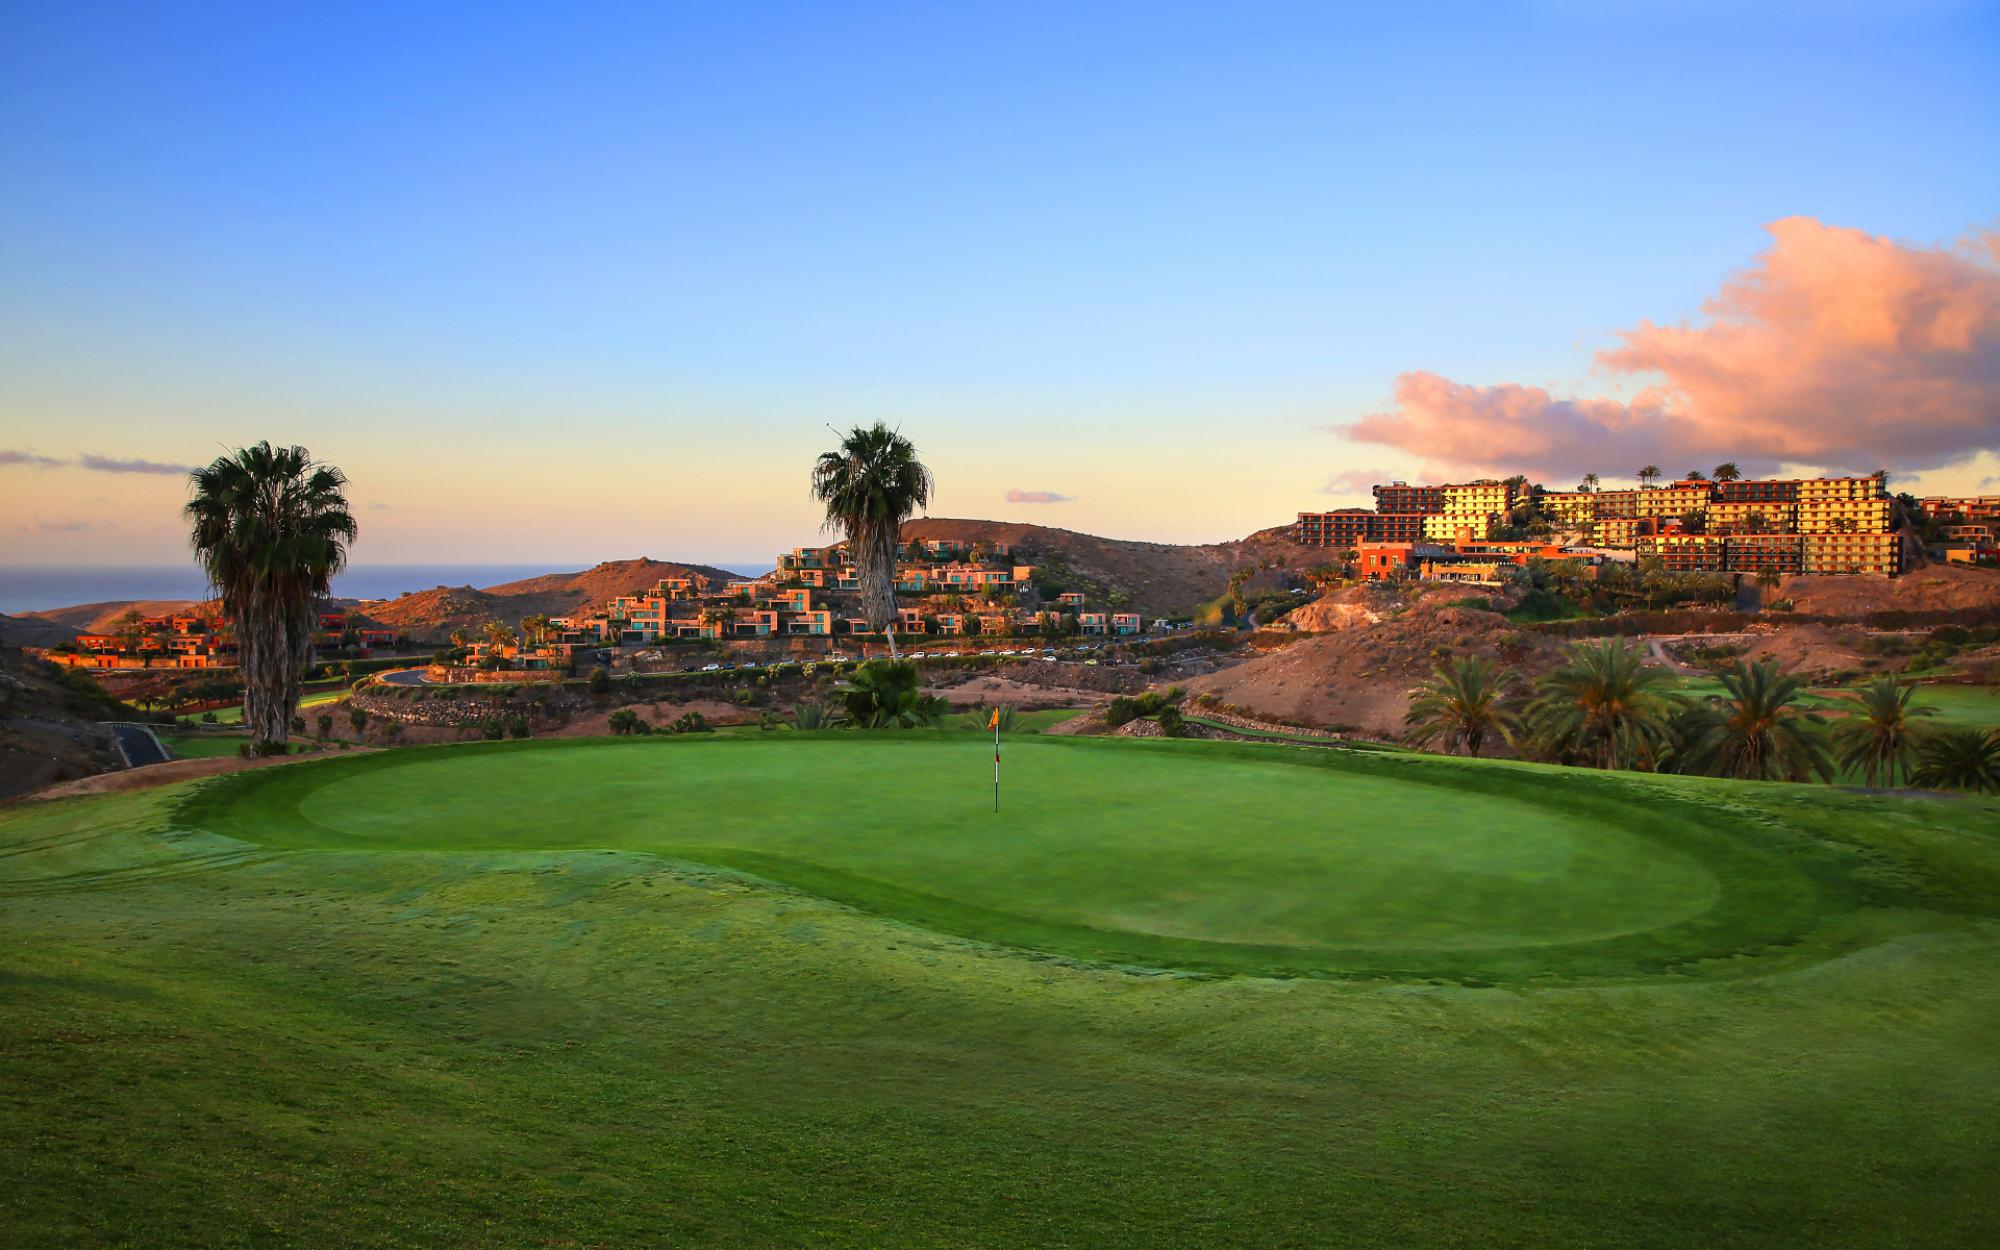 The Salobre Golf Course Old's beautiful golf course within marvelous Gran Canaria.